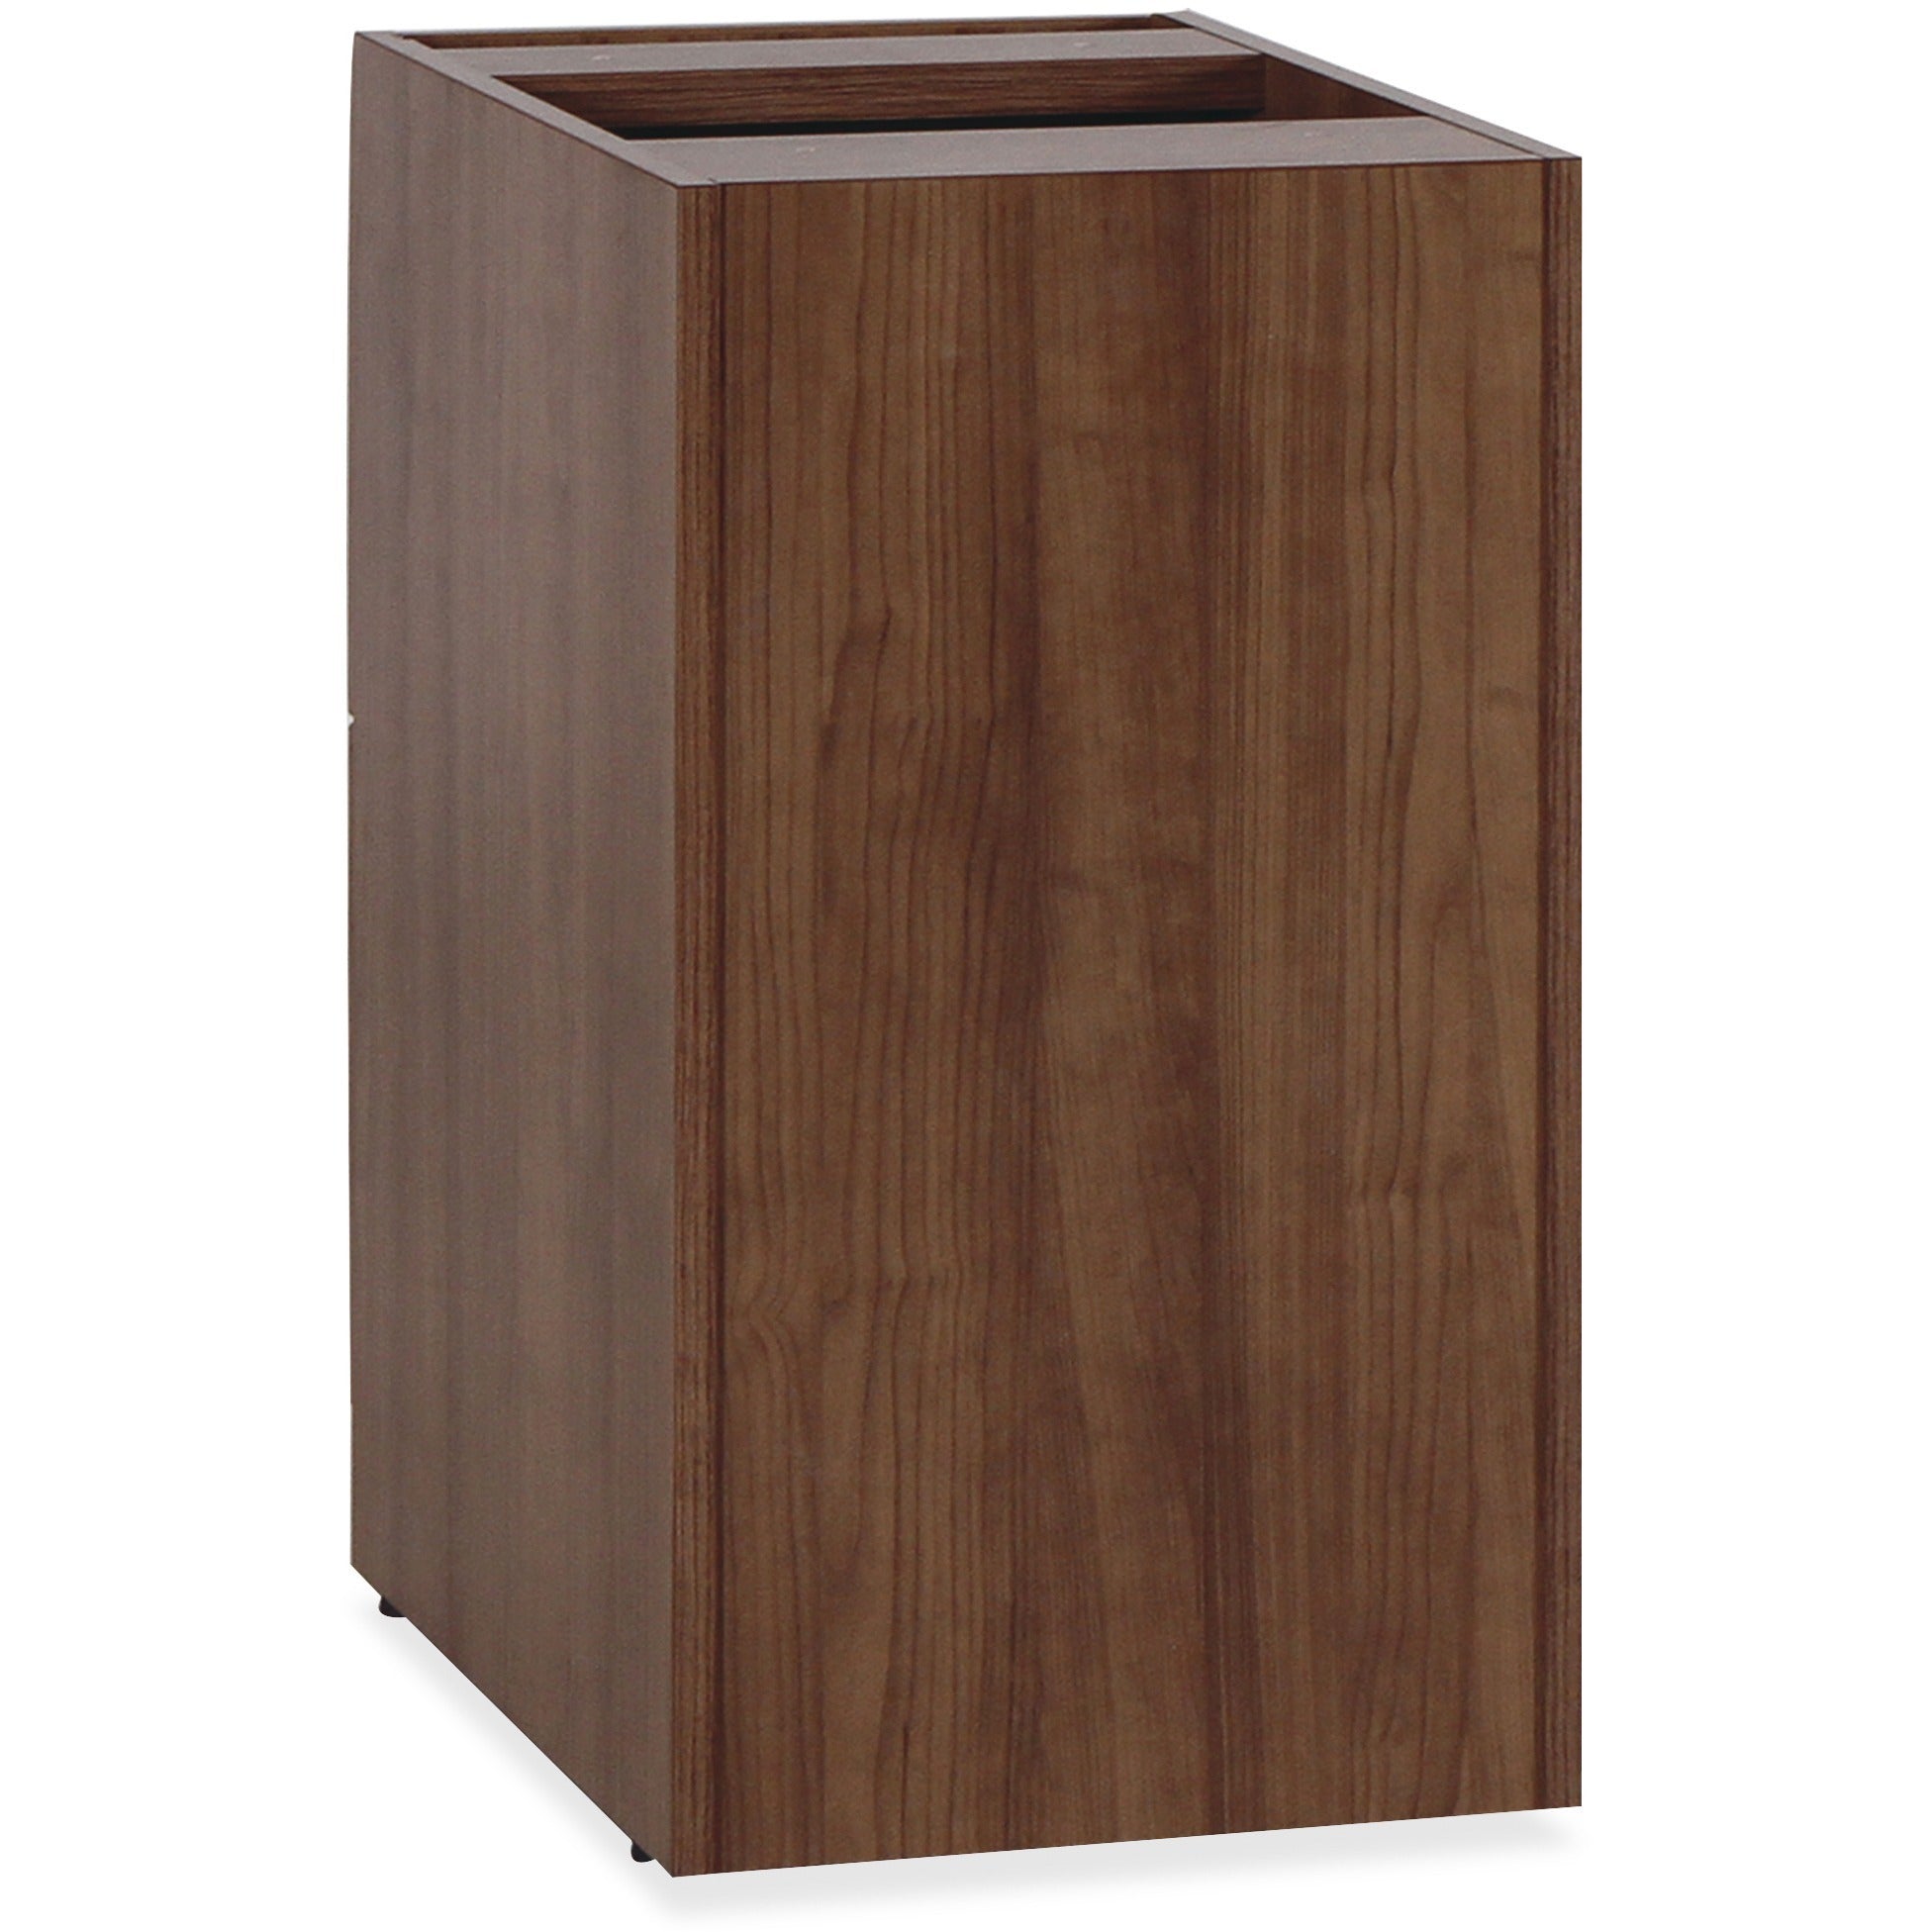 Lorell Essentials Series File/File Fixed File Cabinet - 15.5" x 21.9"28.5" Pedestal, 3.8" - 2 x File Drawer(s) - Finish: Laminate, Walnut - Built-in Hangrail, Ball-bearing Suspension, Mobility - For File, File Folder - 